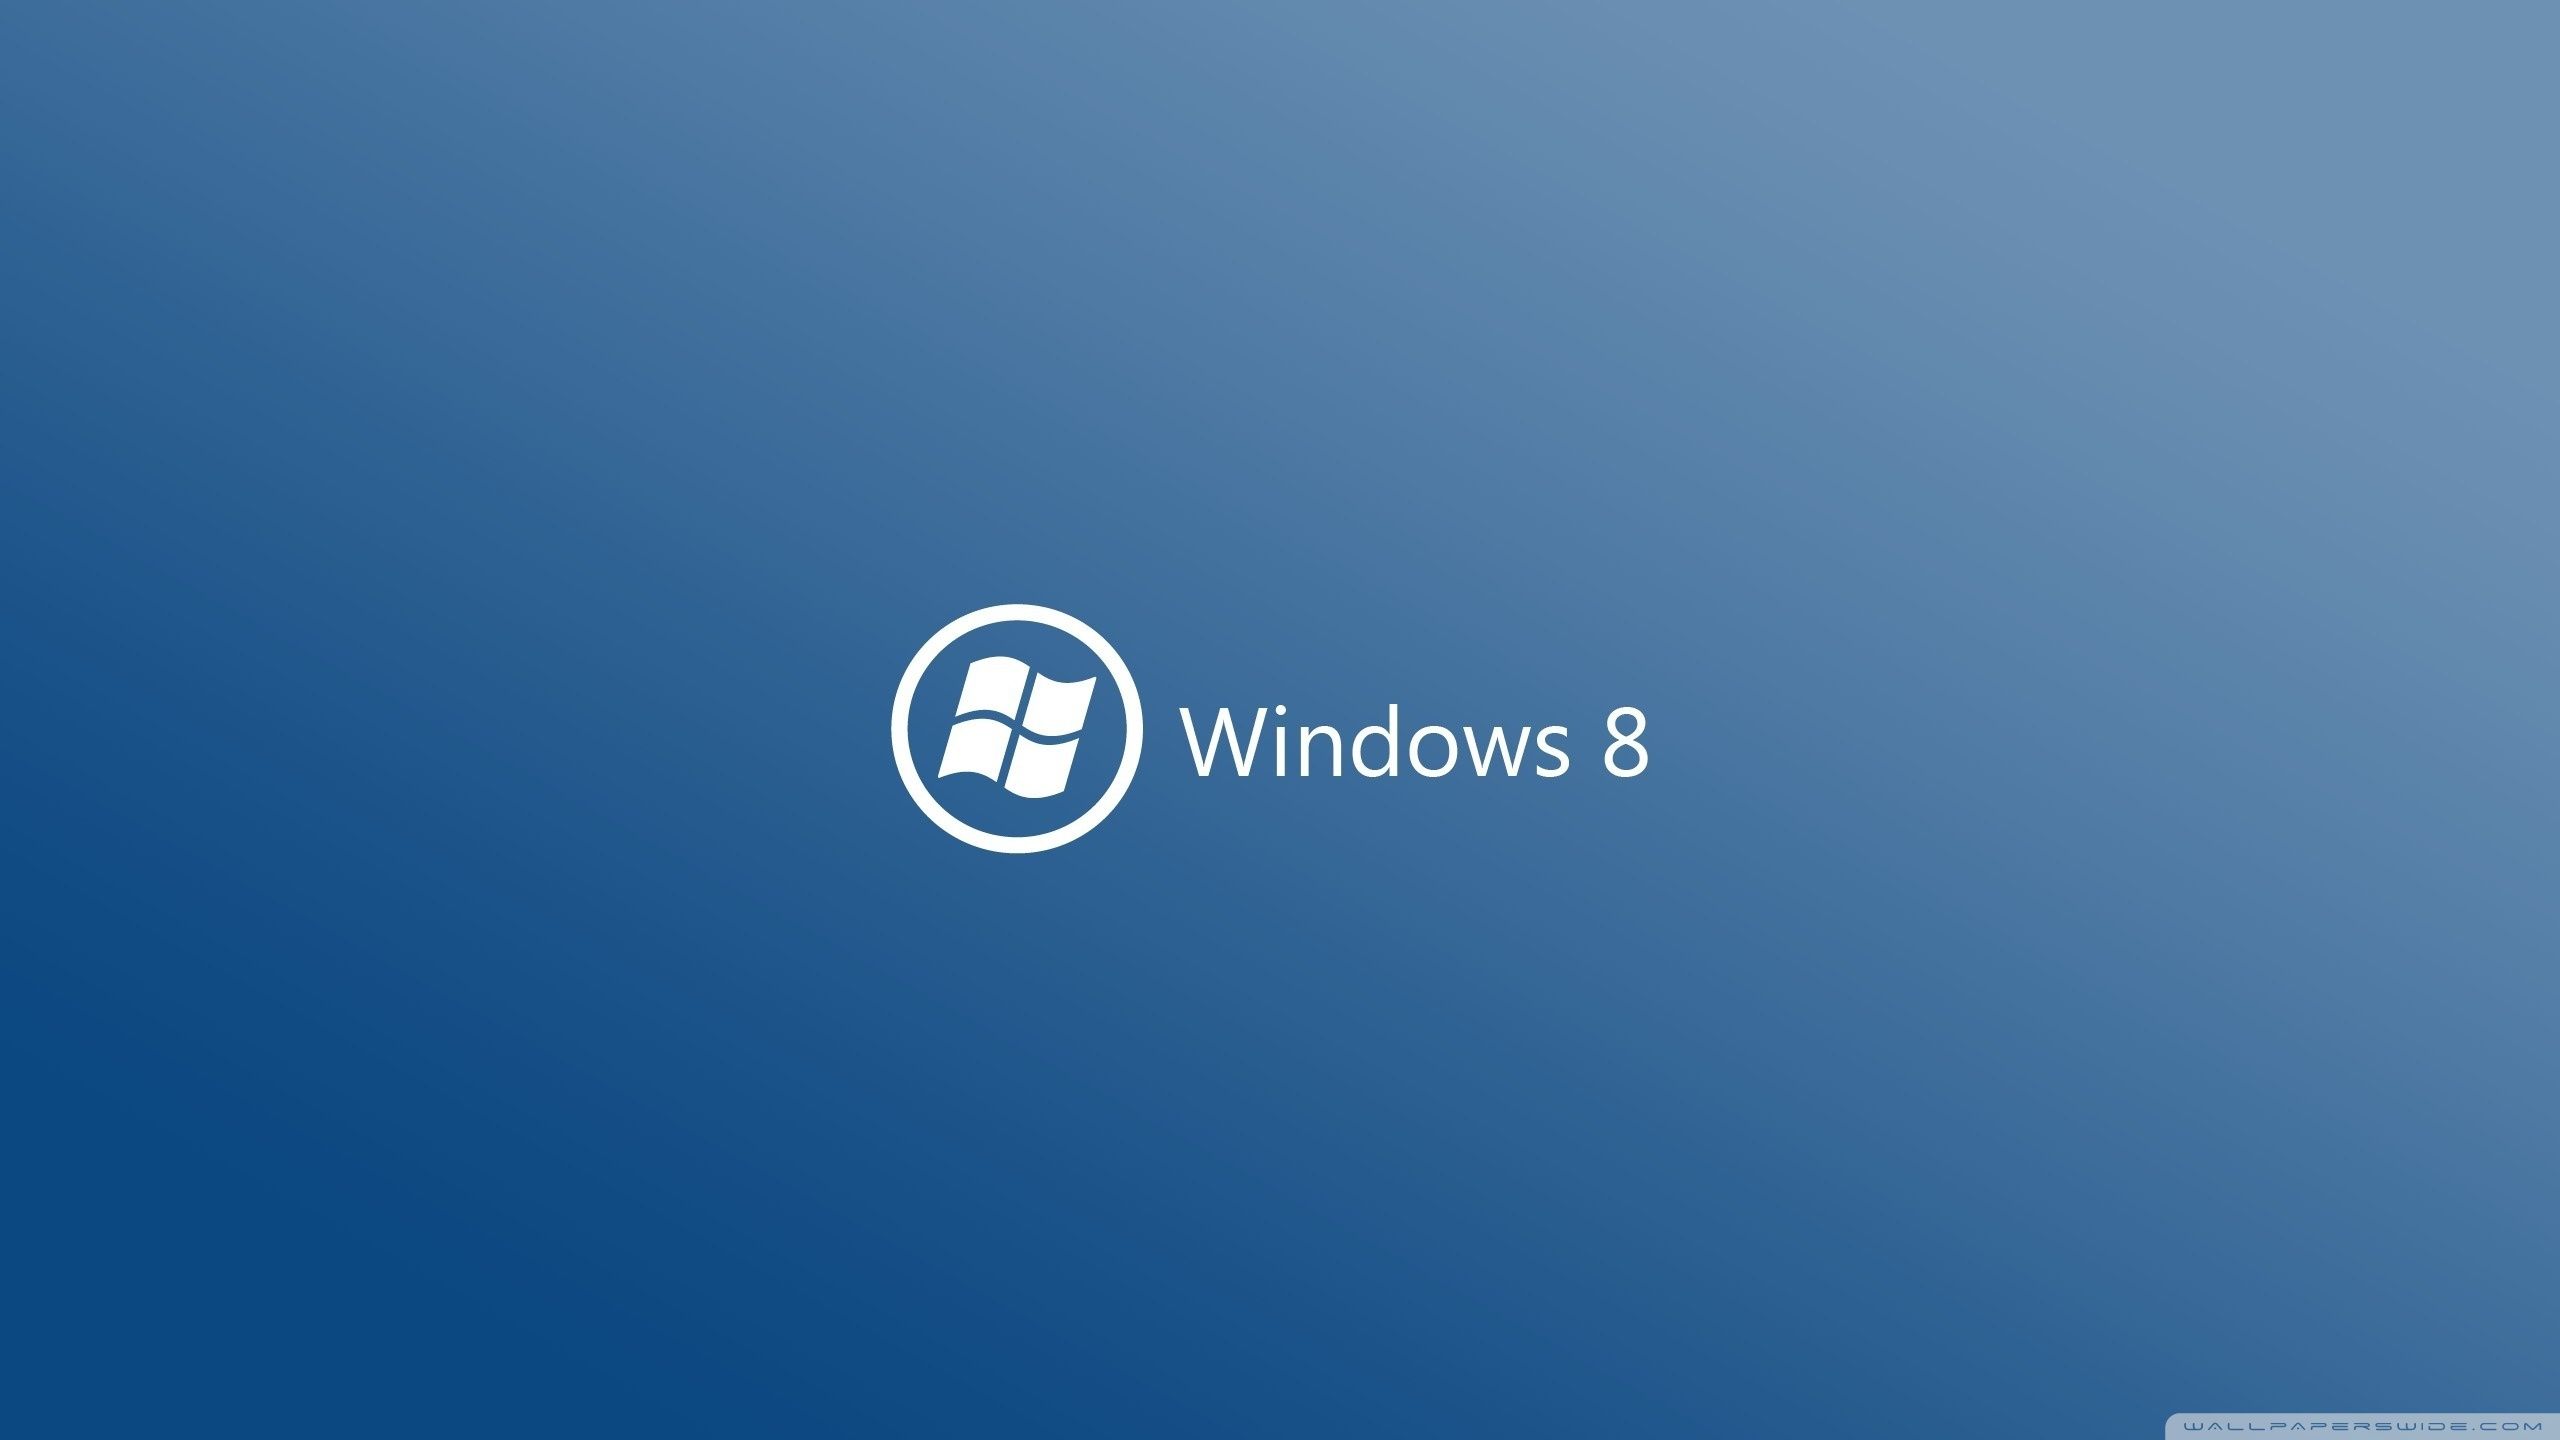 Windows 8 blue minmal theme wallpapers and images - wallpapers ...